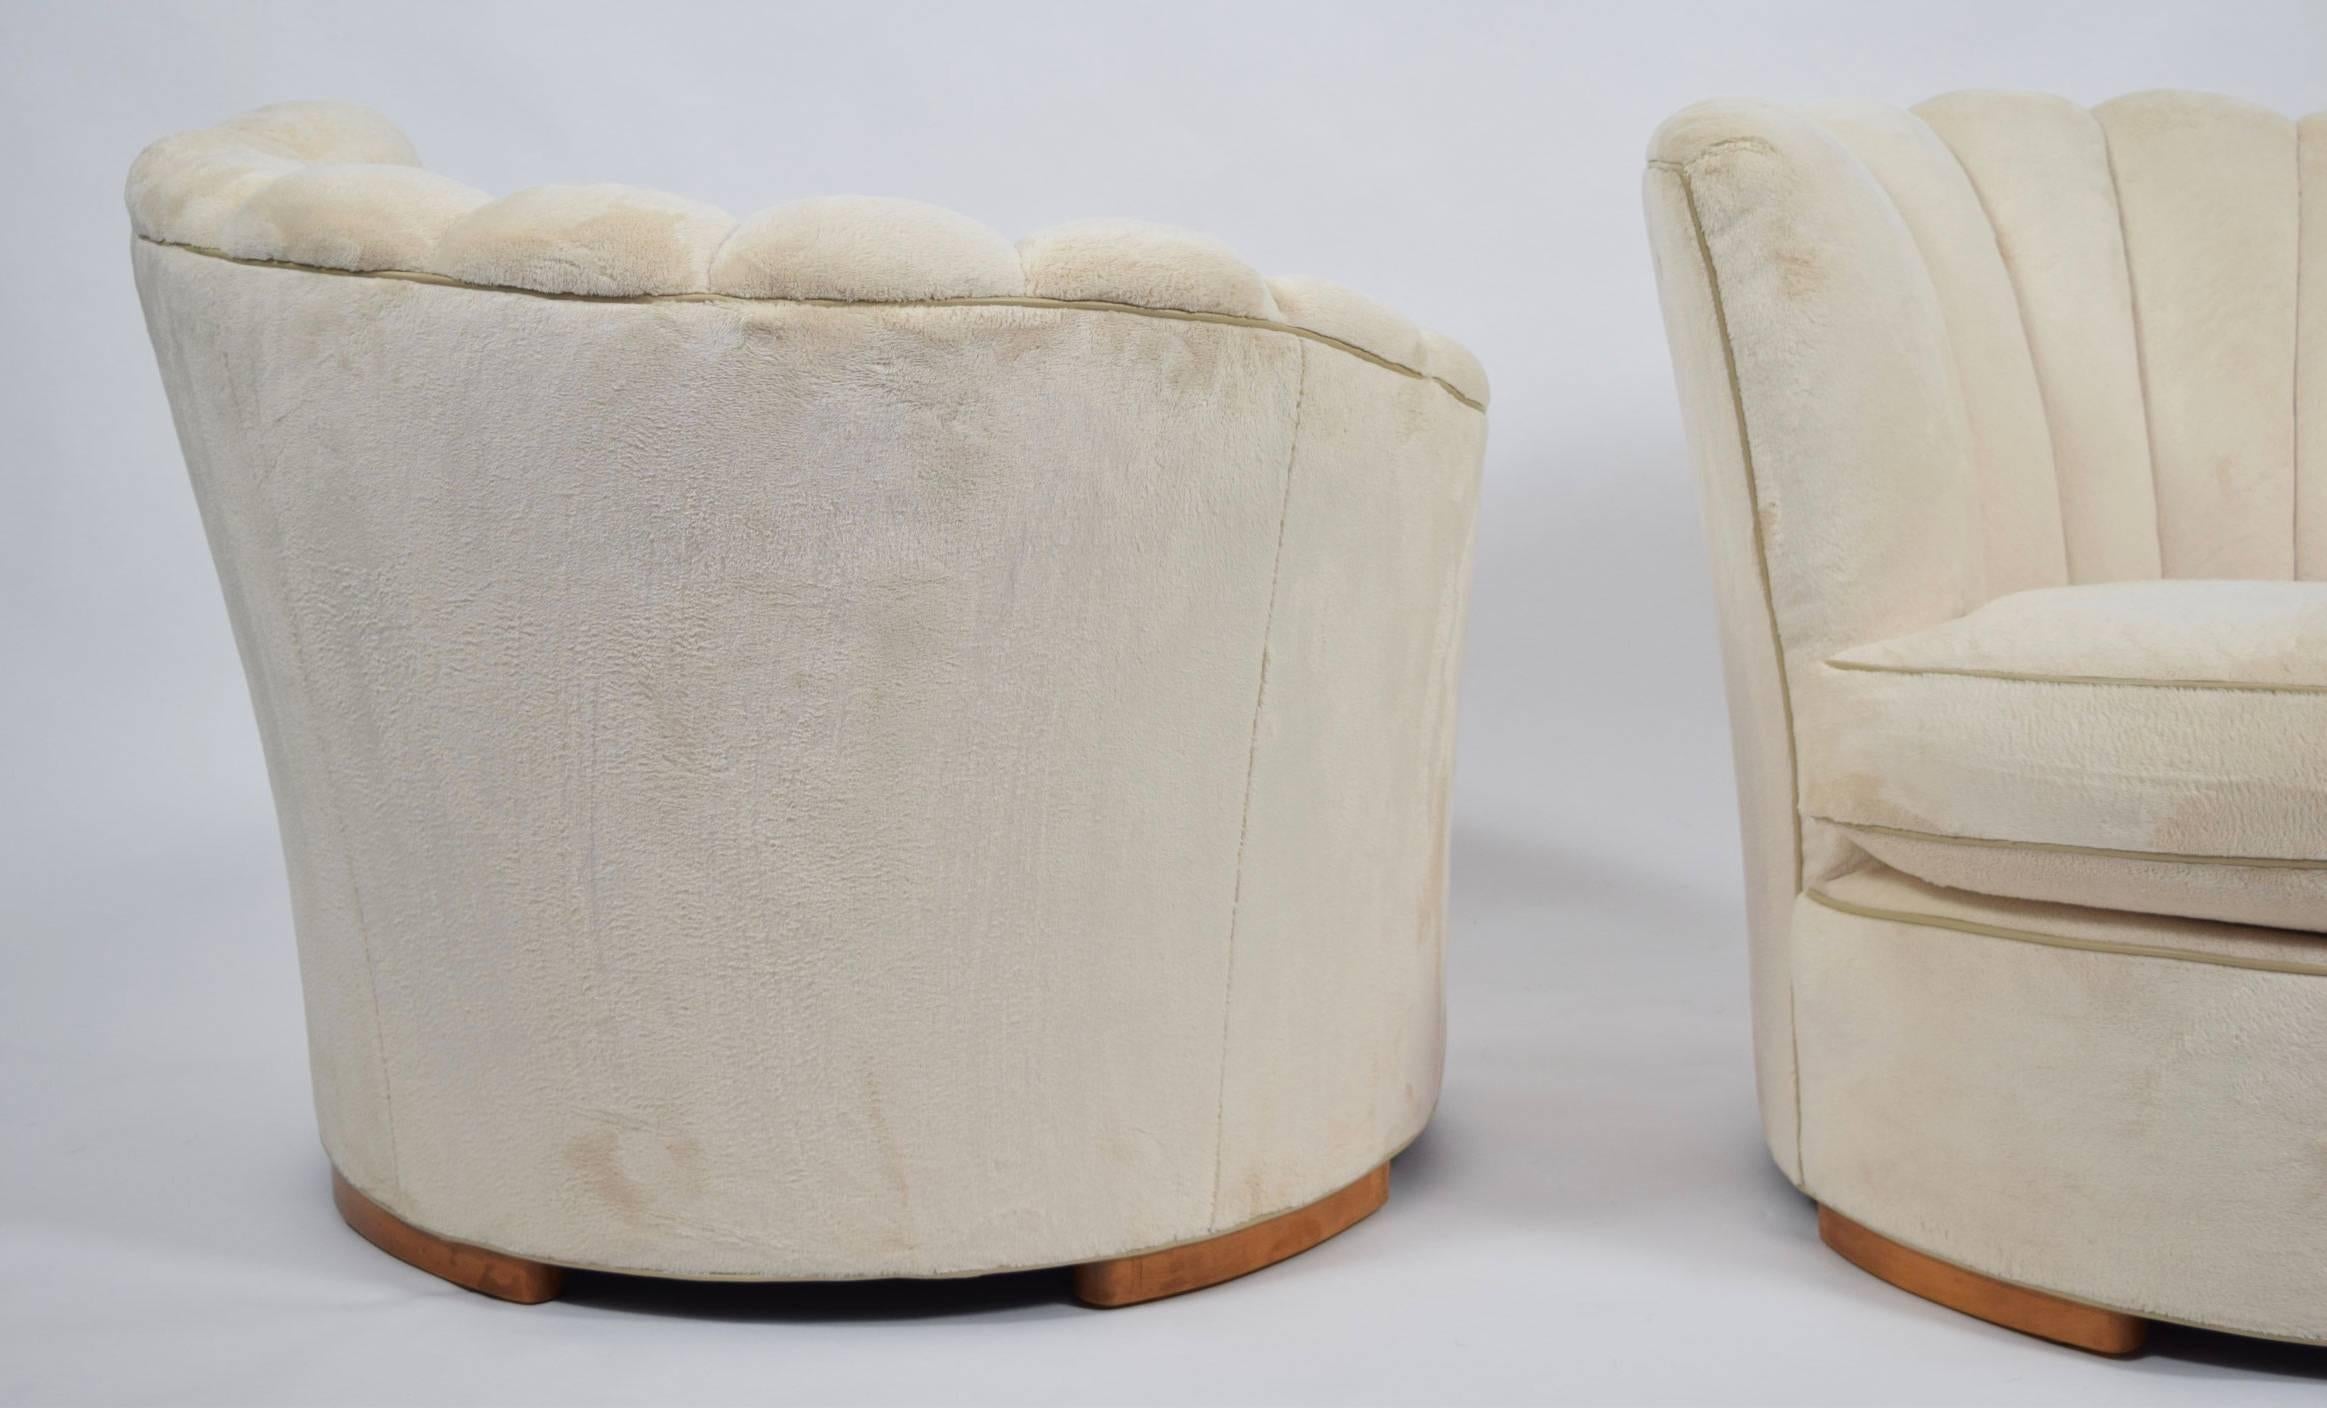 A beautiful pair of deco style lounge chairs with fan backs. Fabric is a high pile velvet which is soft and plush with a cream leather trim. Chairs sit on four rounded wooden legs.